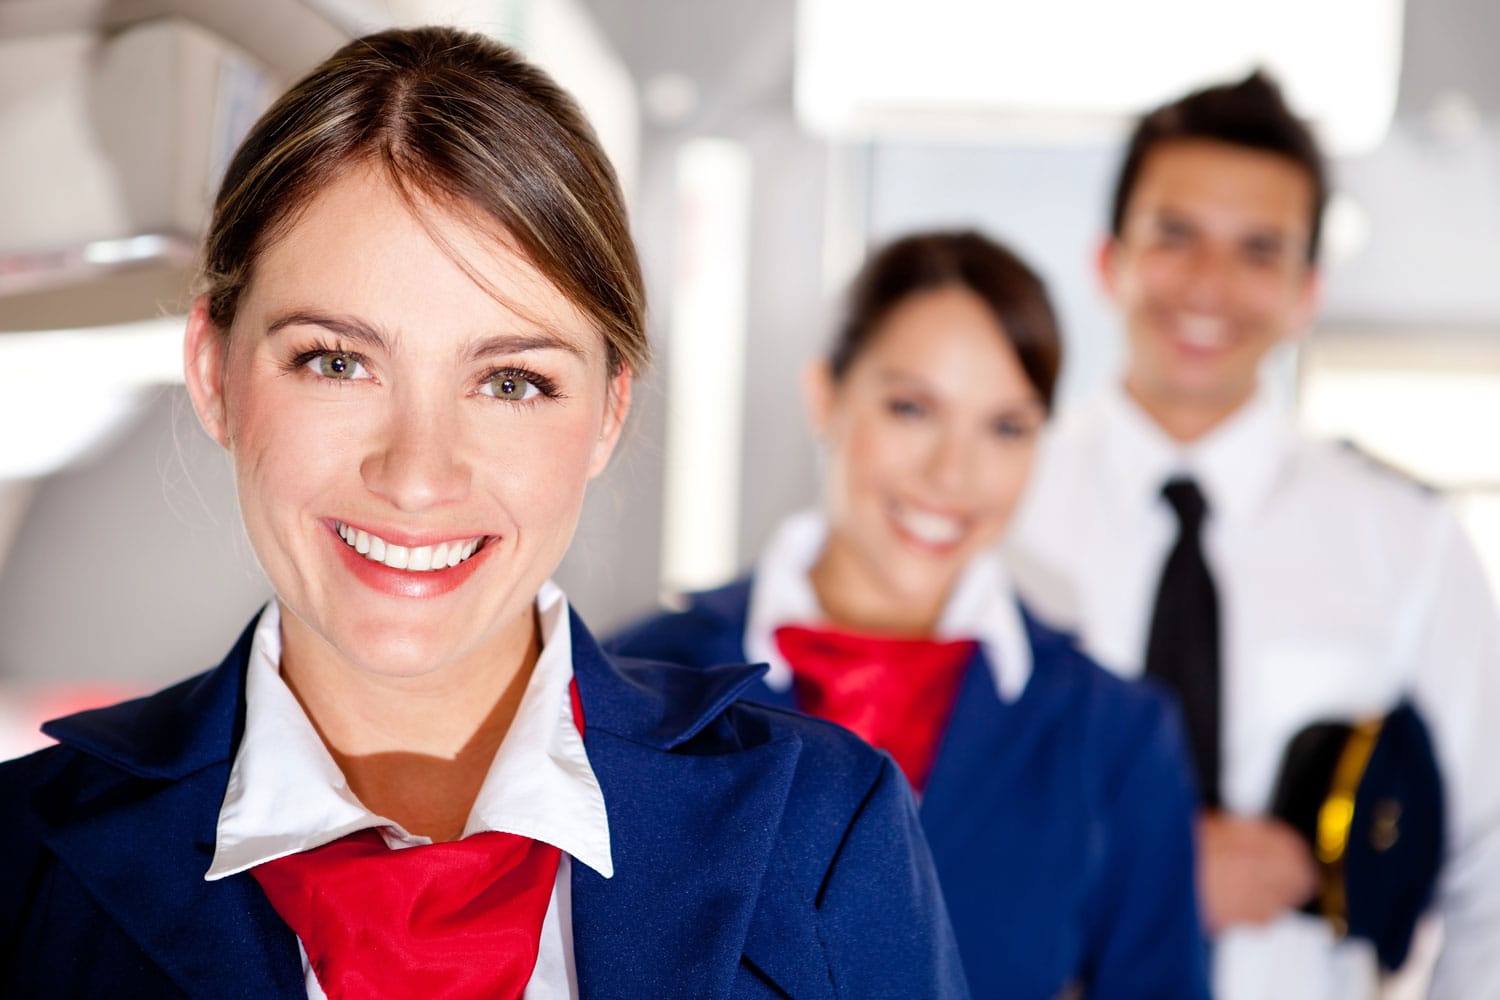 Air hostess with the airplane cabin crew smiling